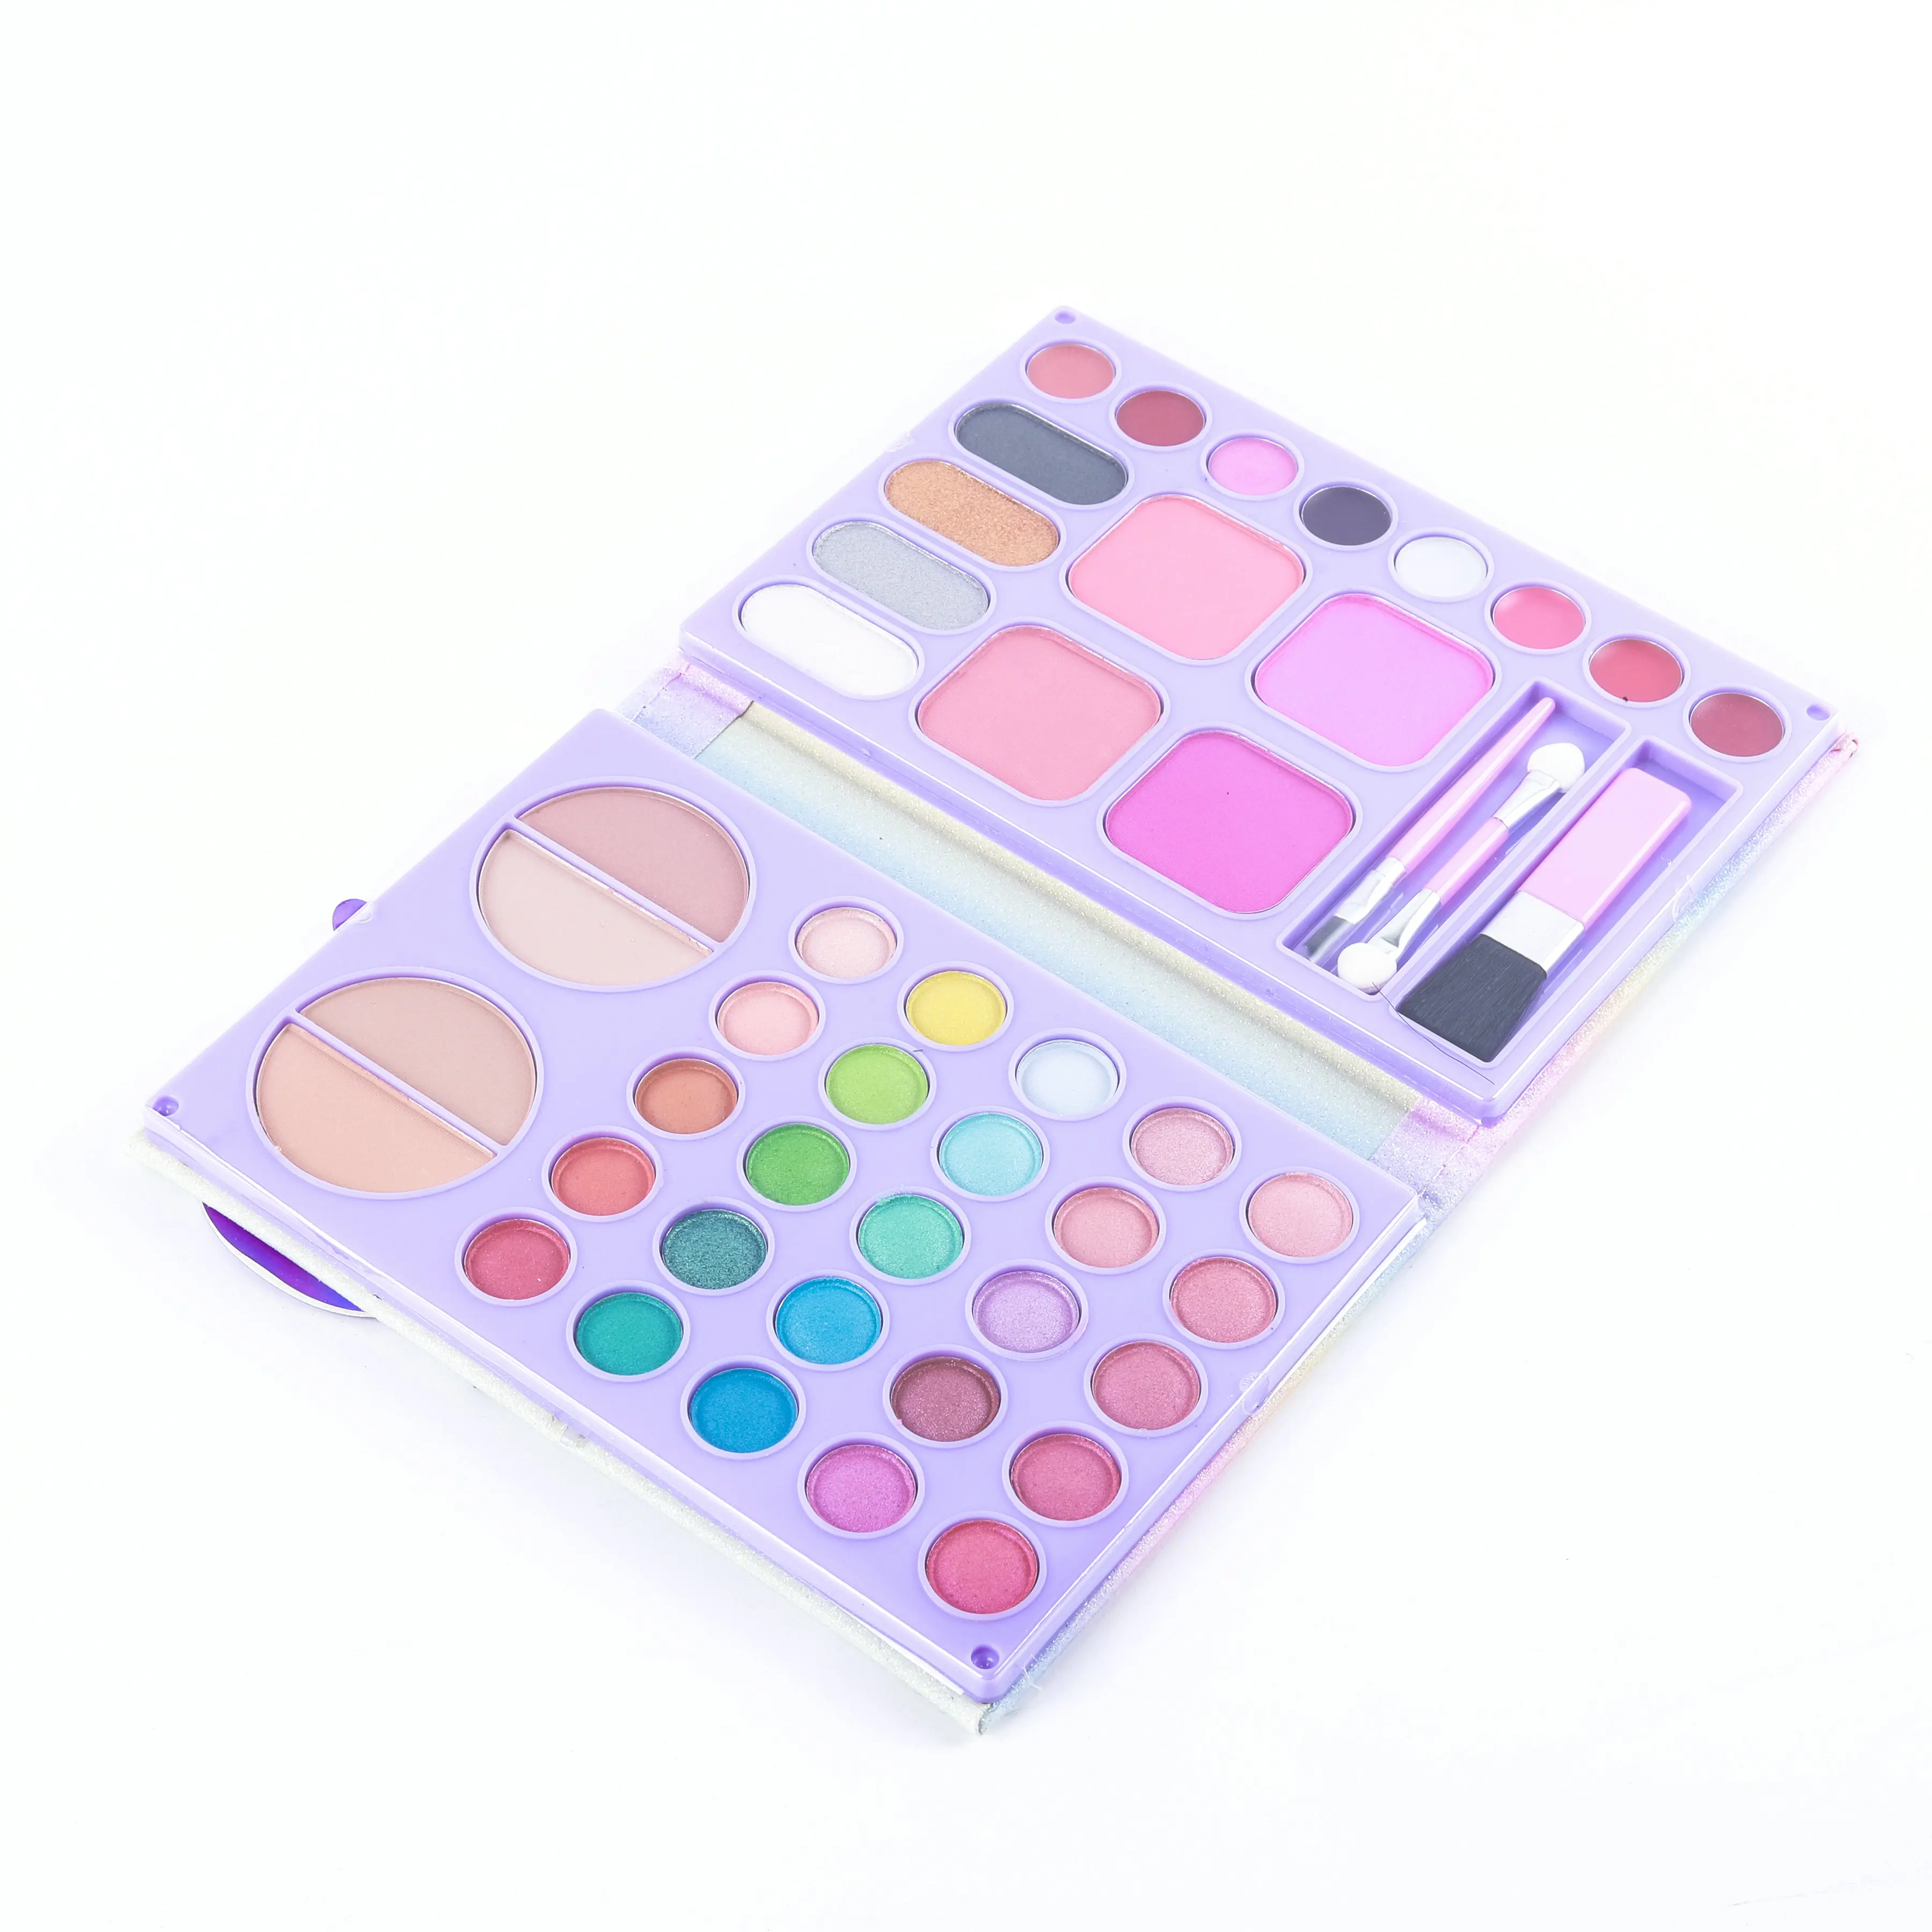 OEM children cosmetics sets kids makeup pretend toy make up beauty gift girls sets cosmetics play makeup for kids